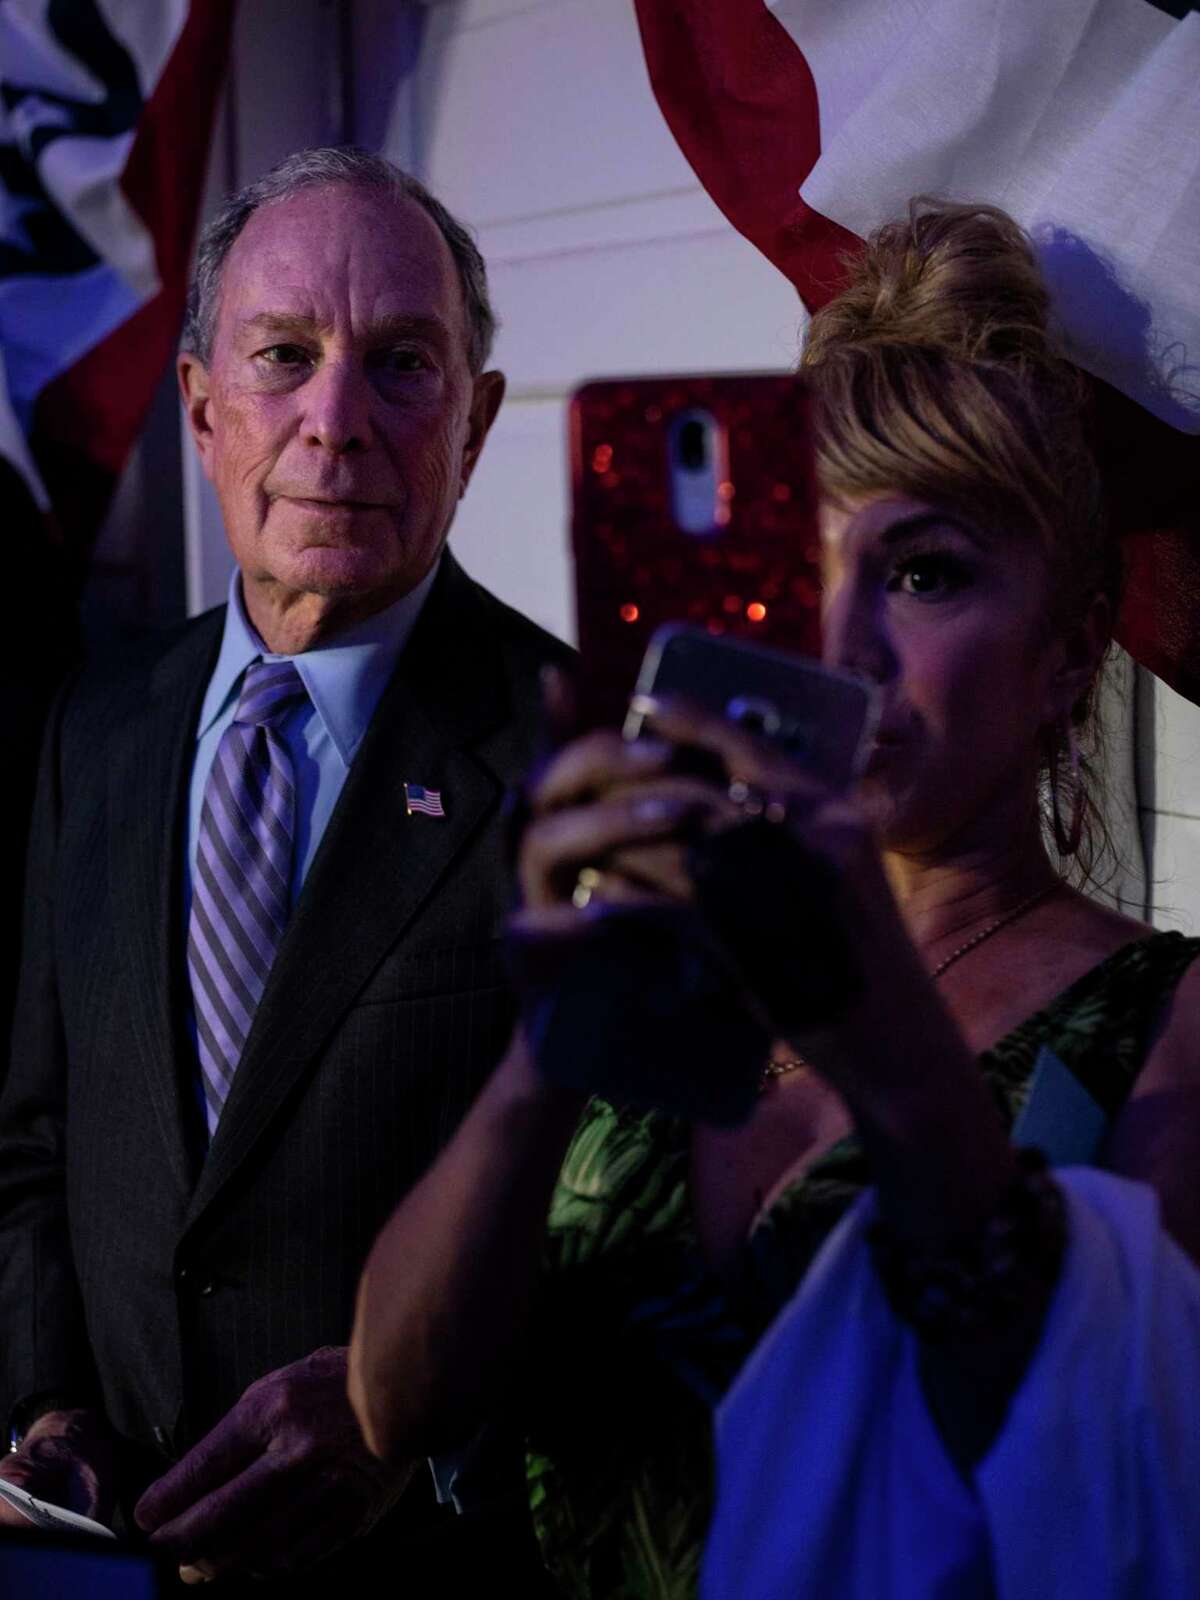 Former Mayor Michael R. Bloomberg takes a selfie with a supporter as he waits to take the stage for his campaign rally in San Antonio, Texas ahead Super Tuesday on Sunday, March 1, 2020.